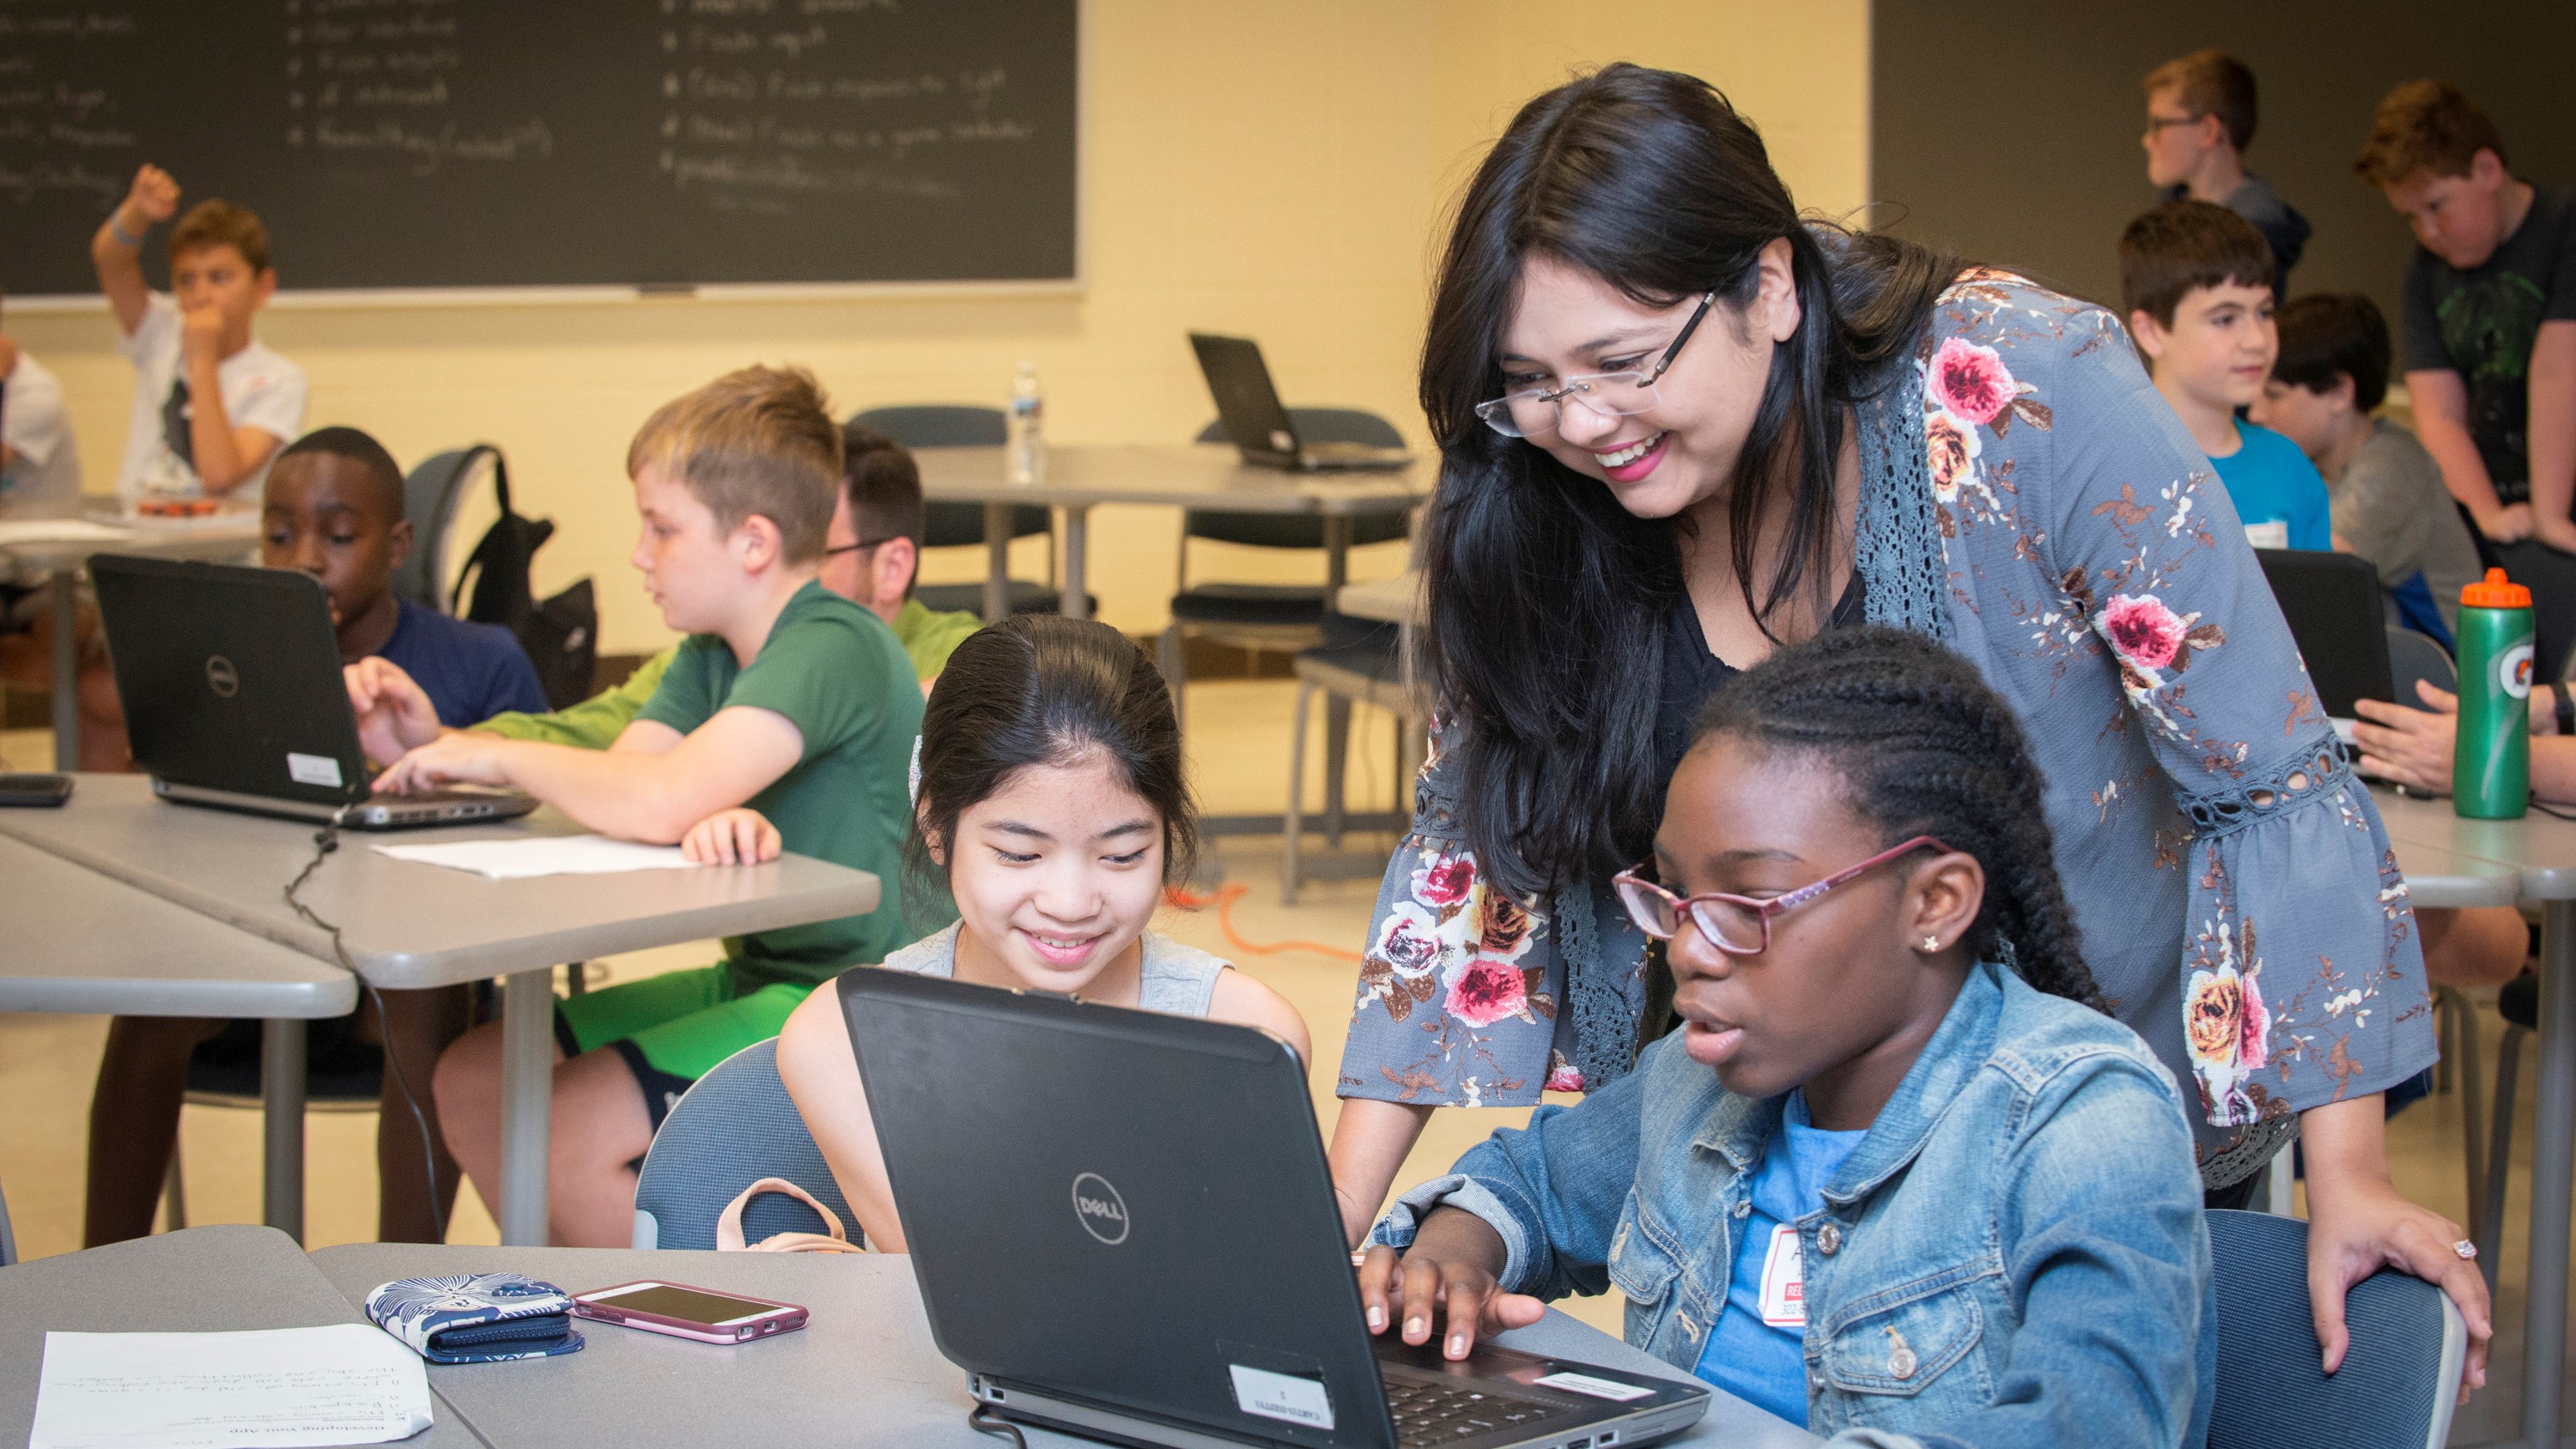 A University of Delaware student works on a computer science activity on a laptop with two middle school students.